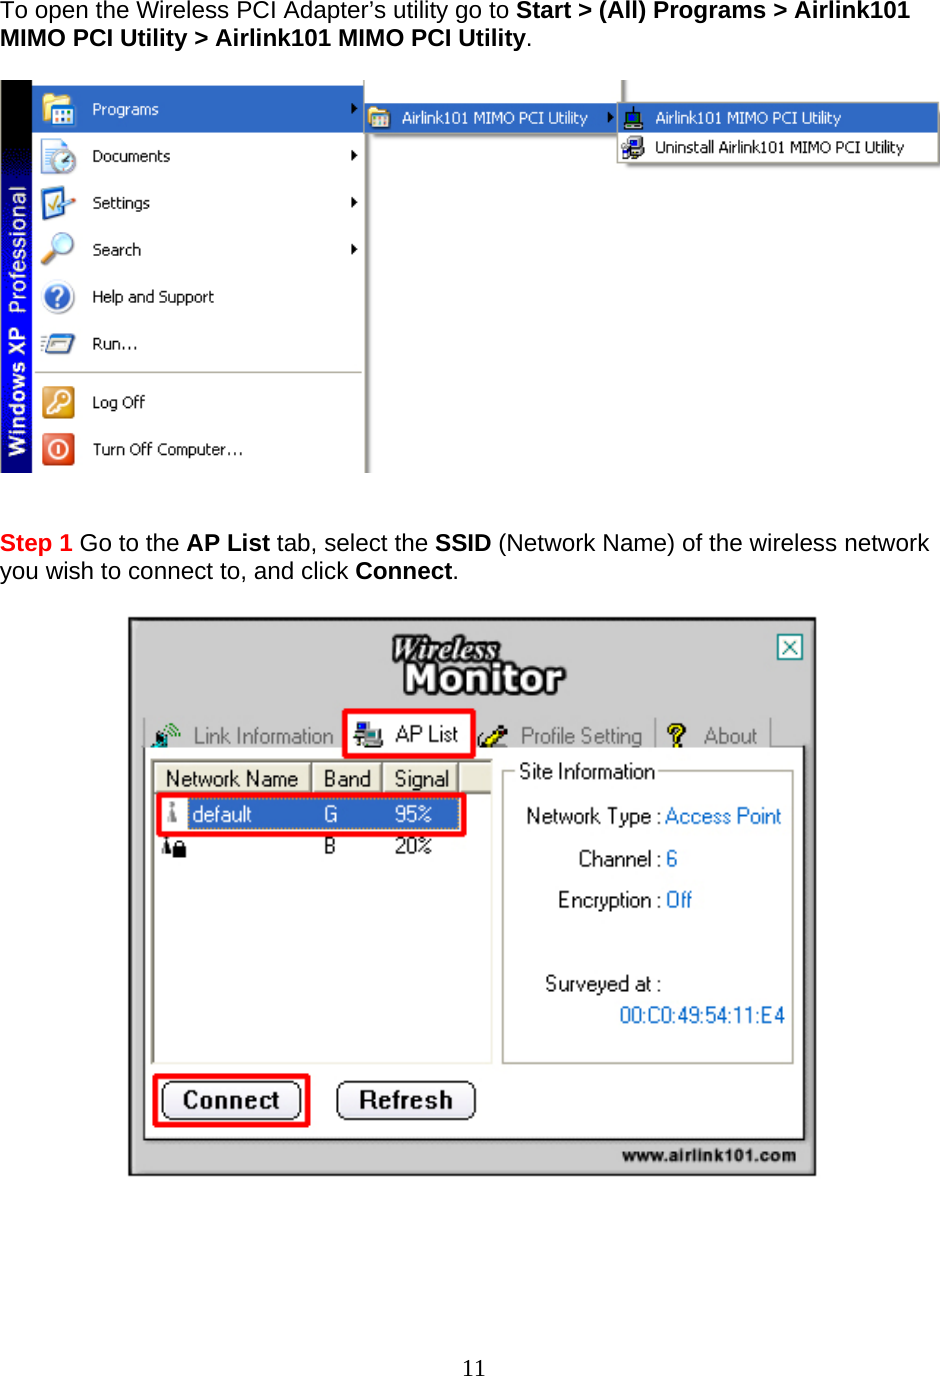 11 To open the Wireless PCI Adapter’s utility go to Start &gt; (All) Programs &gt; Airlink101 MIMO PCI Utility &gt; Airlink101 MIMO PCI Utility.     Step 1 Go to the AP List tab, select the SSID (Network Name) of the wireless network you wish to connect to, and click Connect.       